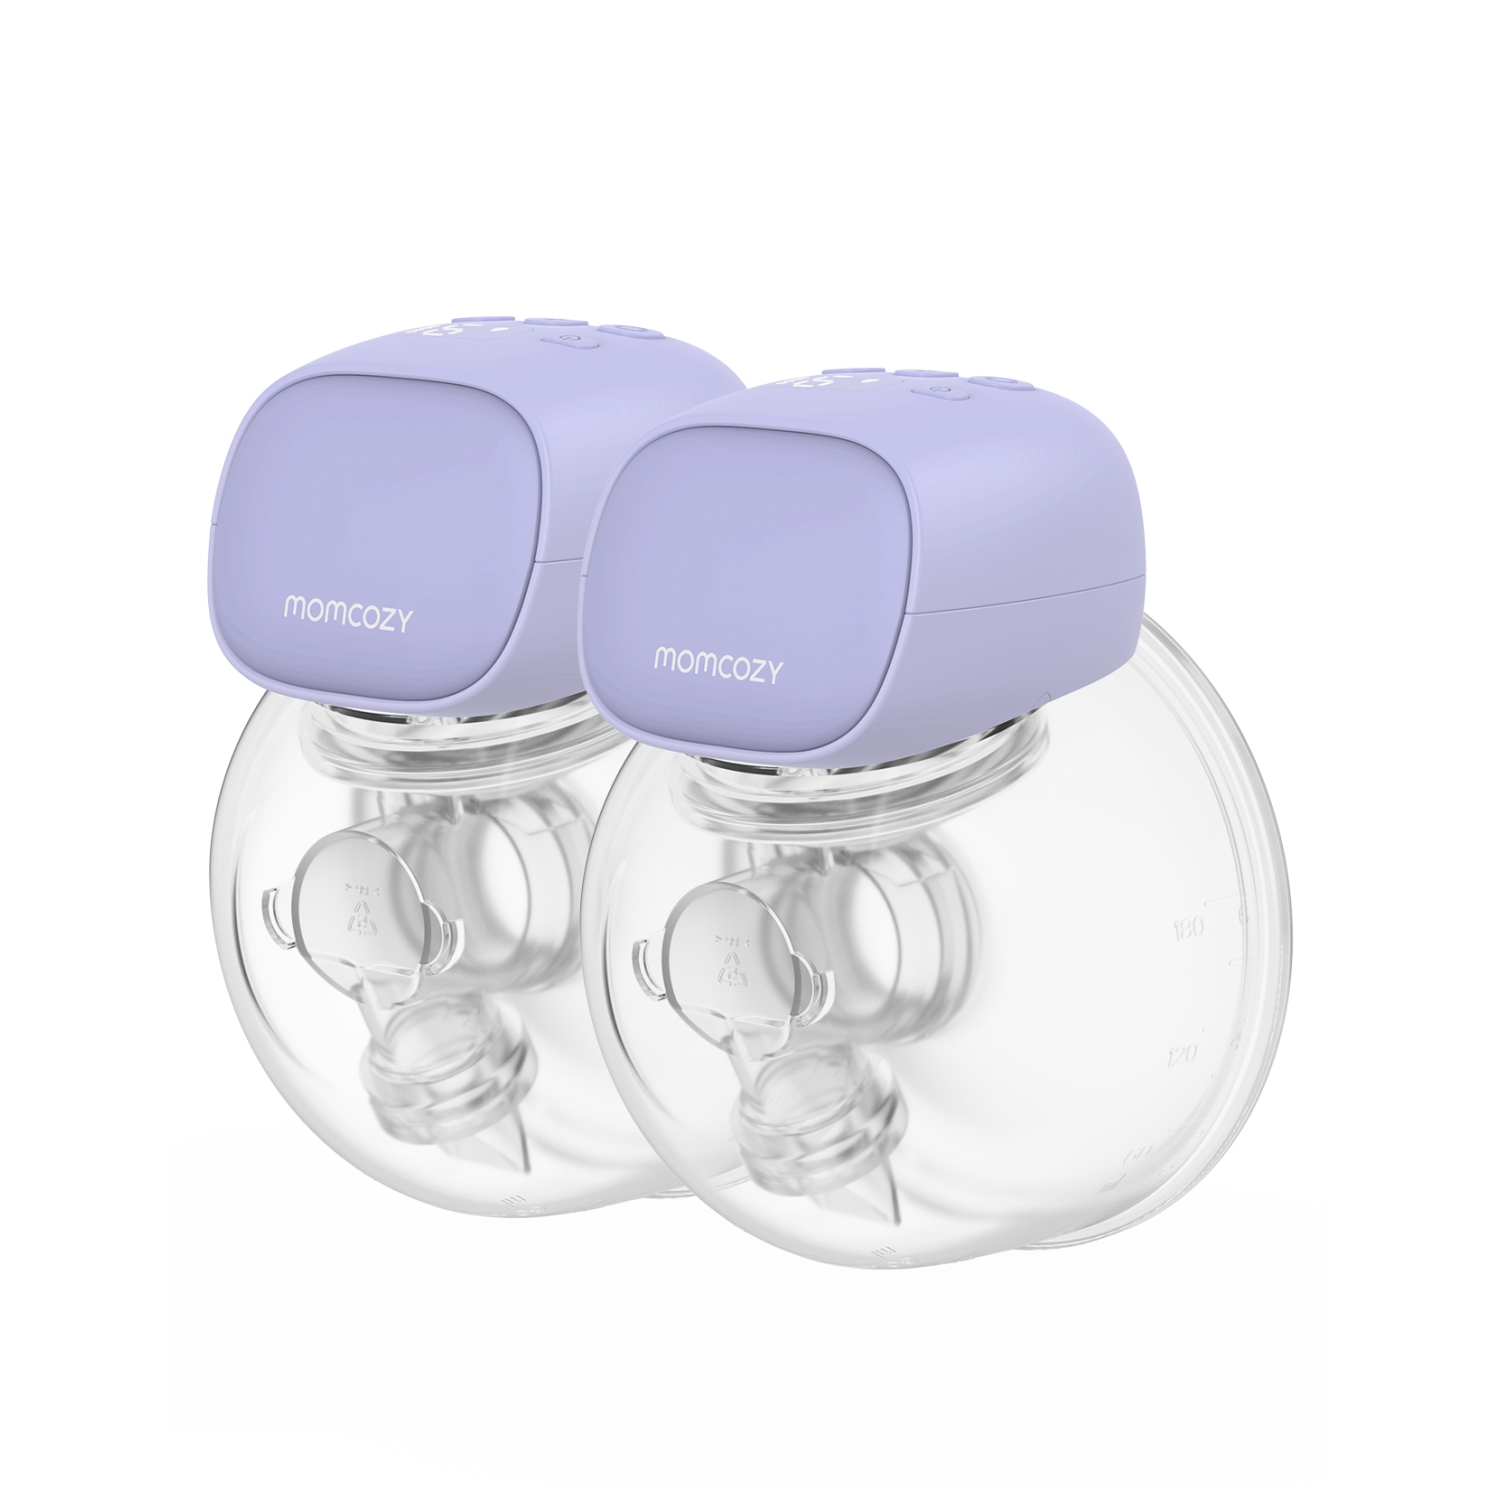 Momcozy S9 Double Wearable Breast Pump Manual: Easy Assembly & Settings